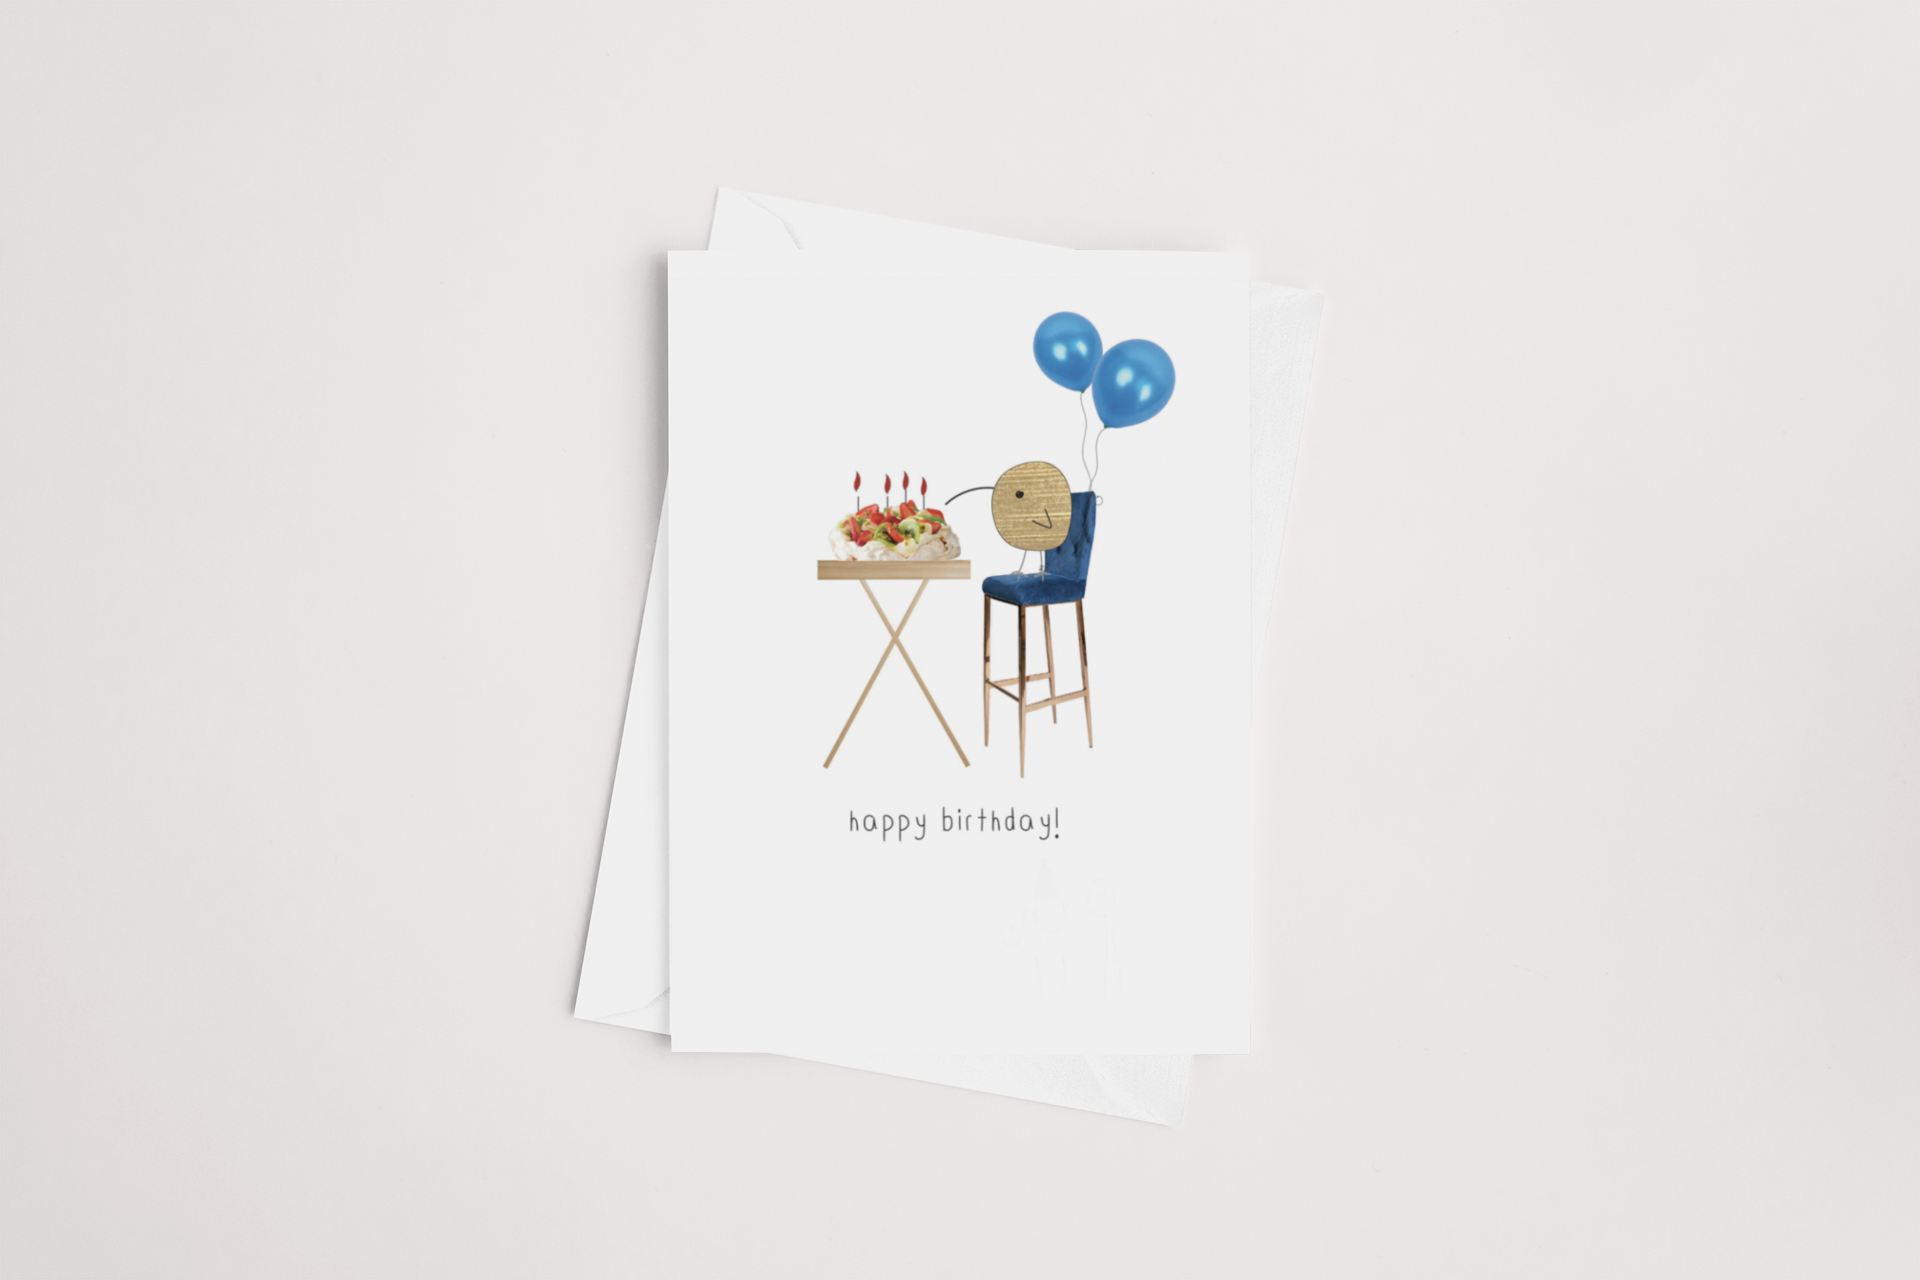 A Kiwi Pavlova Birthday Card, a product of icandy from New Zealand, with a whimsical illustration featuring a smiling round face, a table with a cake, and two balloons on a clean white background, with the words